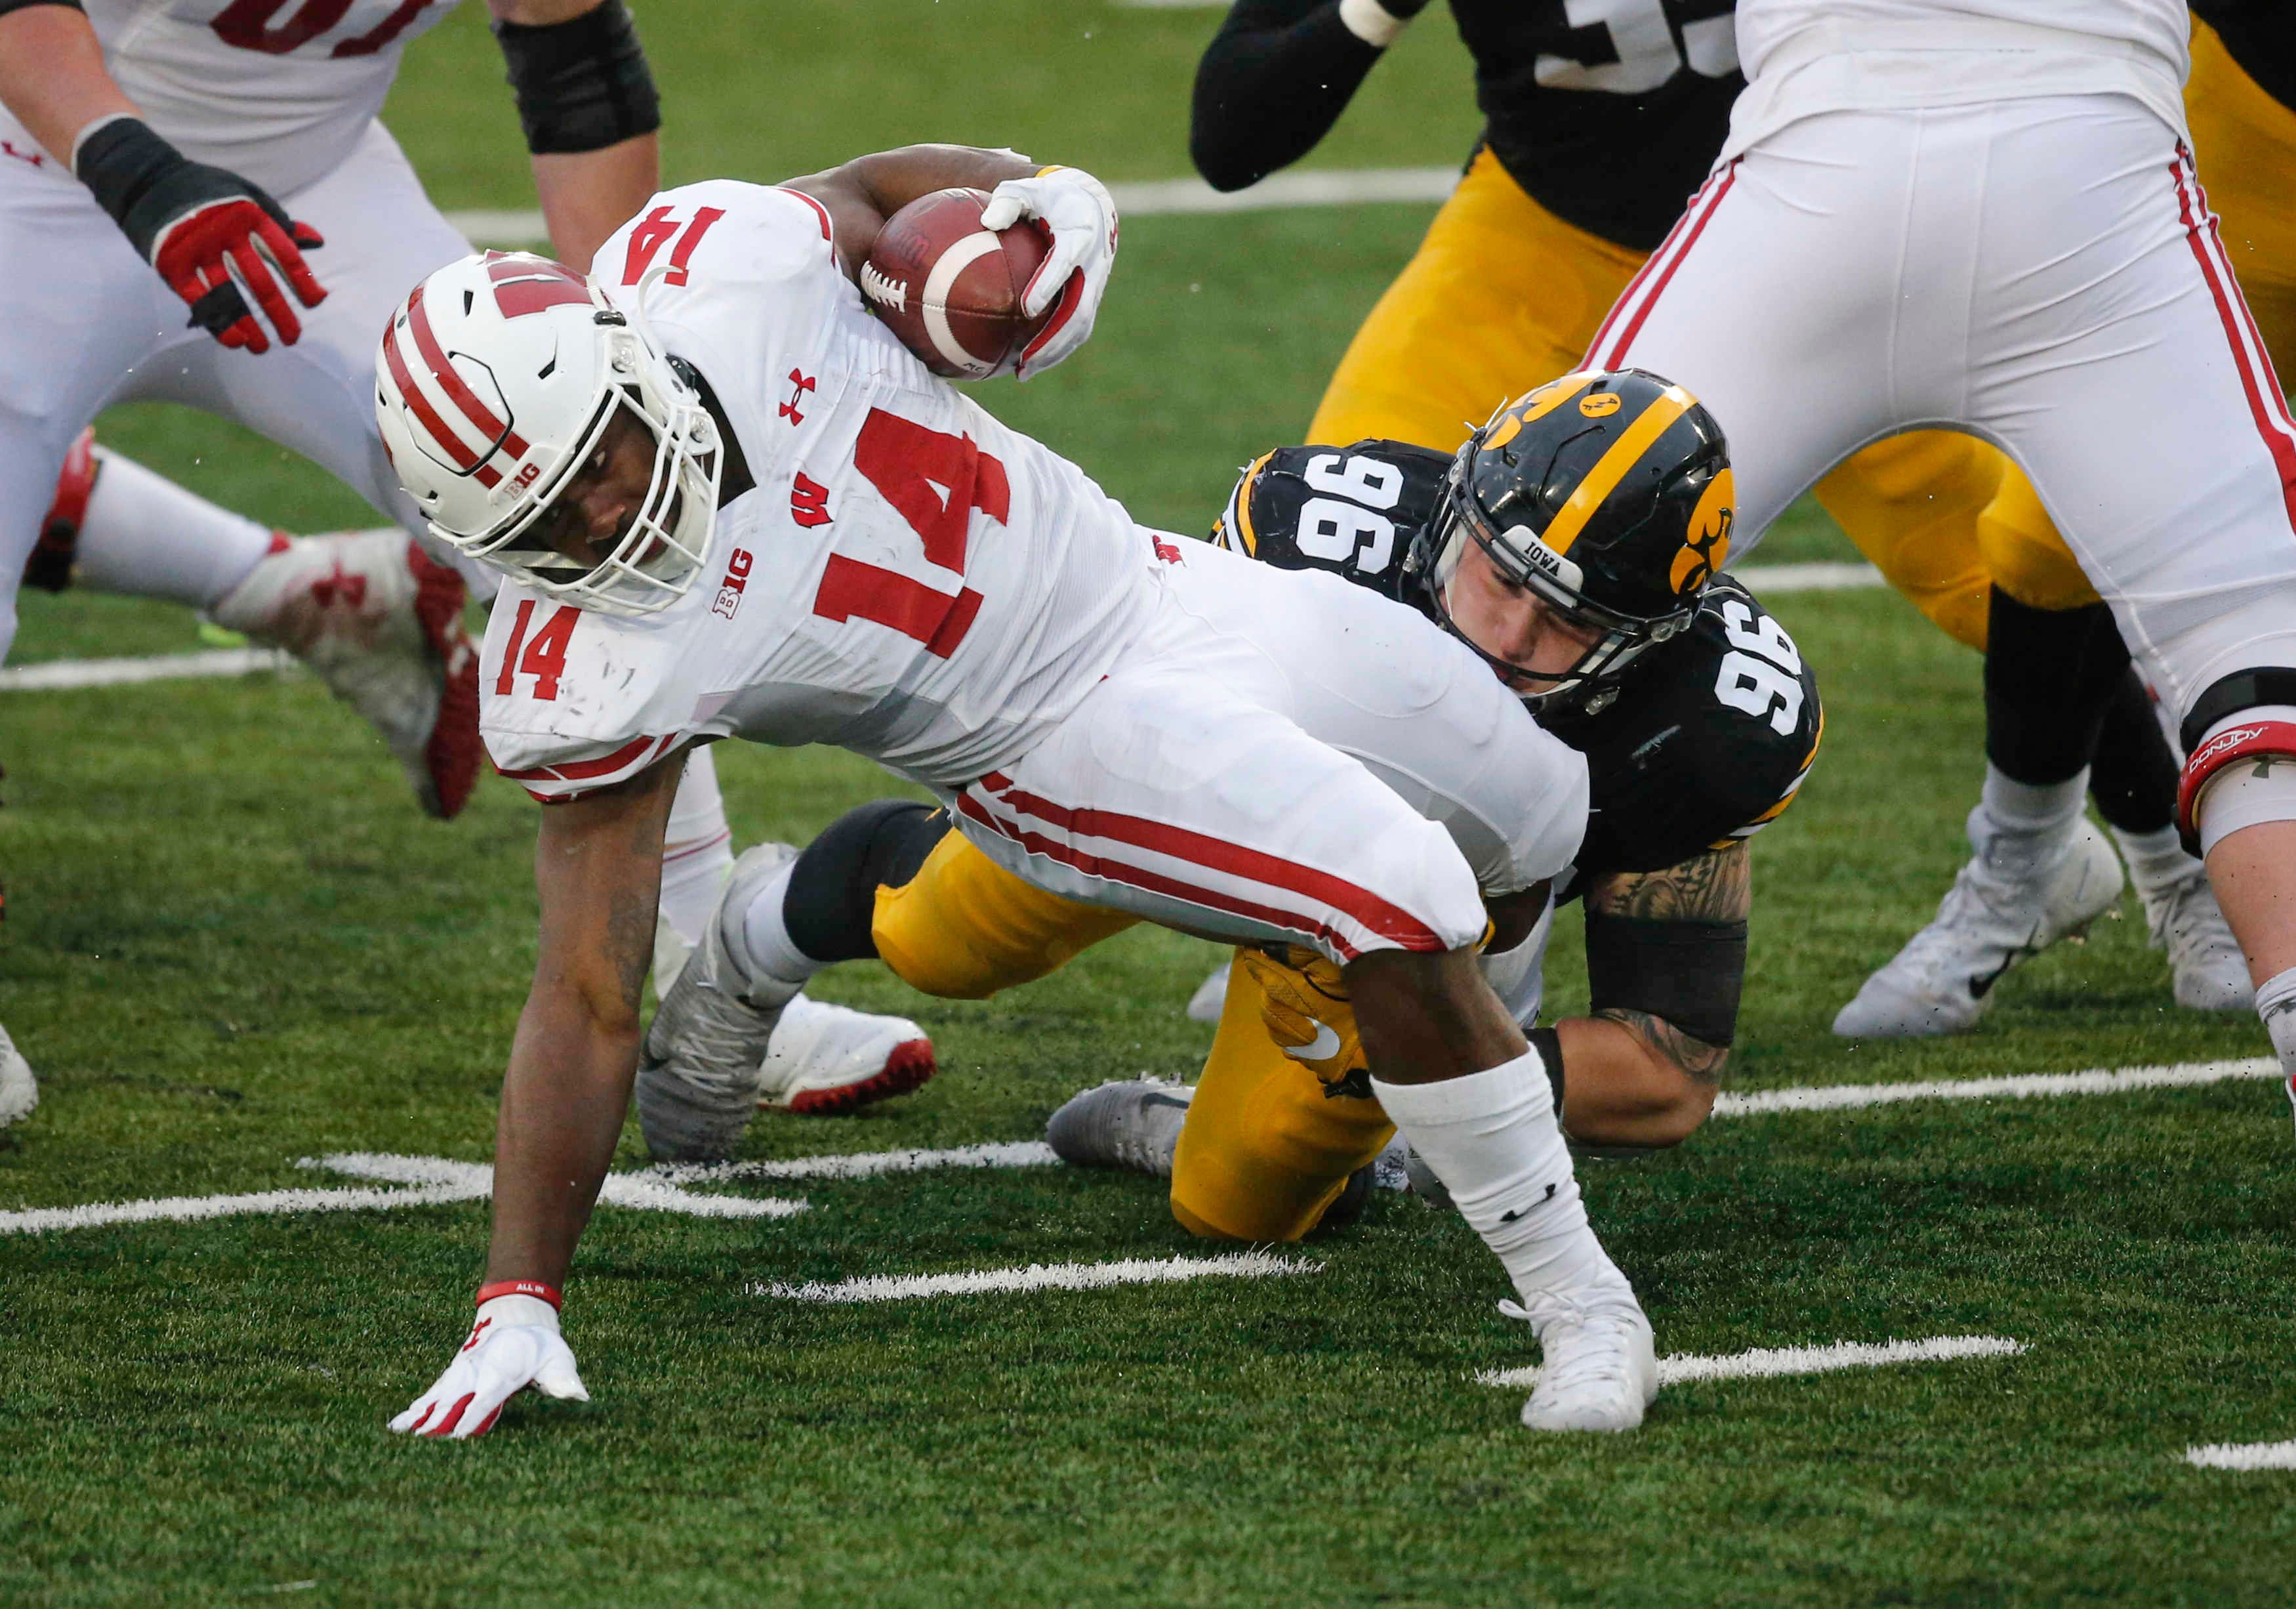 Iowa senior defensive lineman Jack Heflin tackles Wisconsin running back Nakia Watson in the backfield for a loss of yards in the second quarter on Saturday, Dec. 12, 2020, at Kinnick Stadium in Iowa City, Iowa.